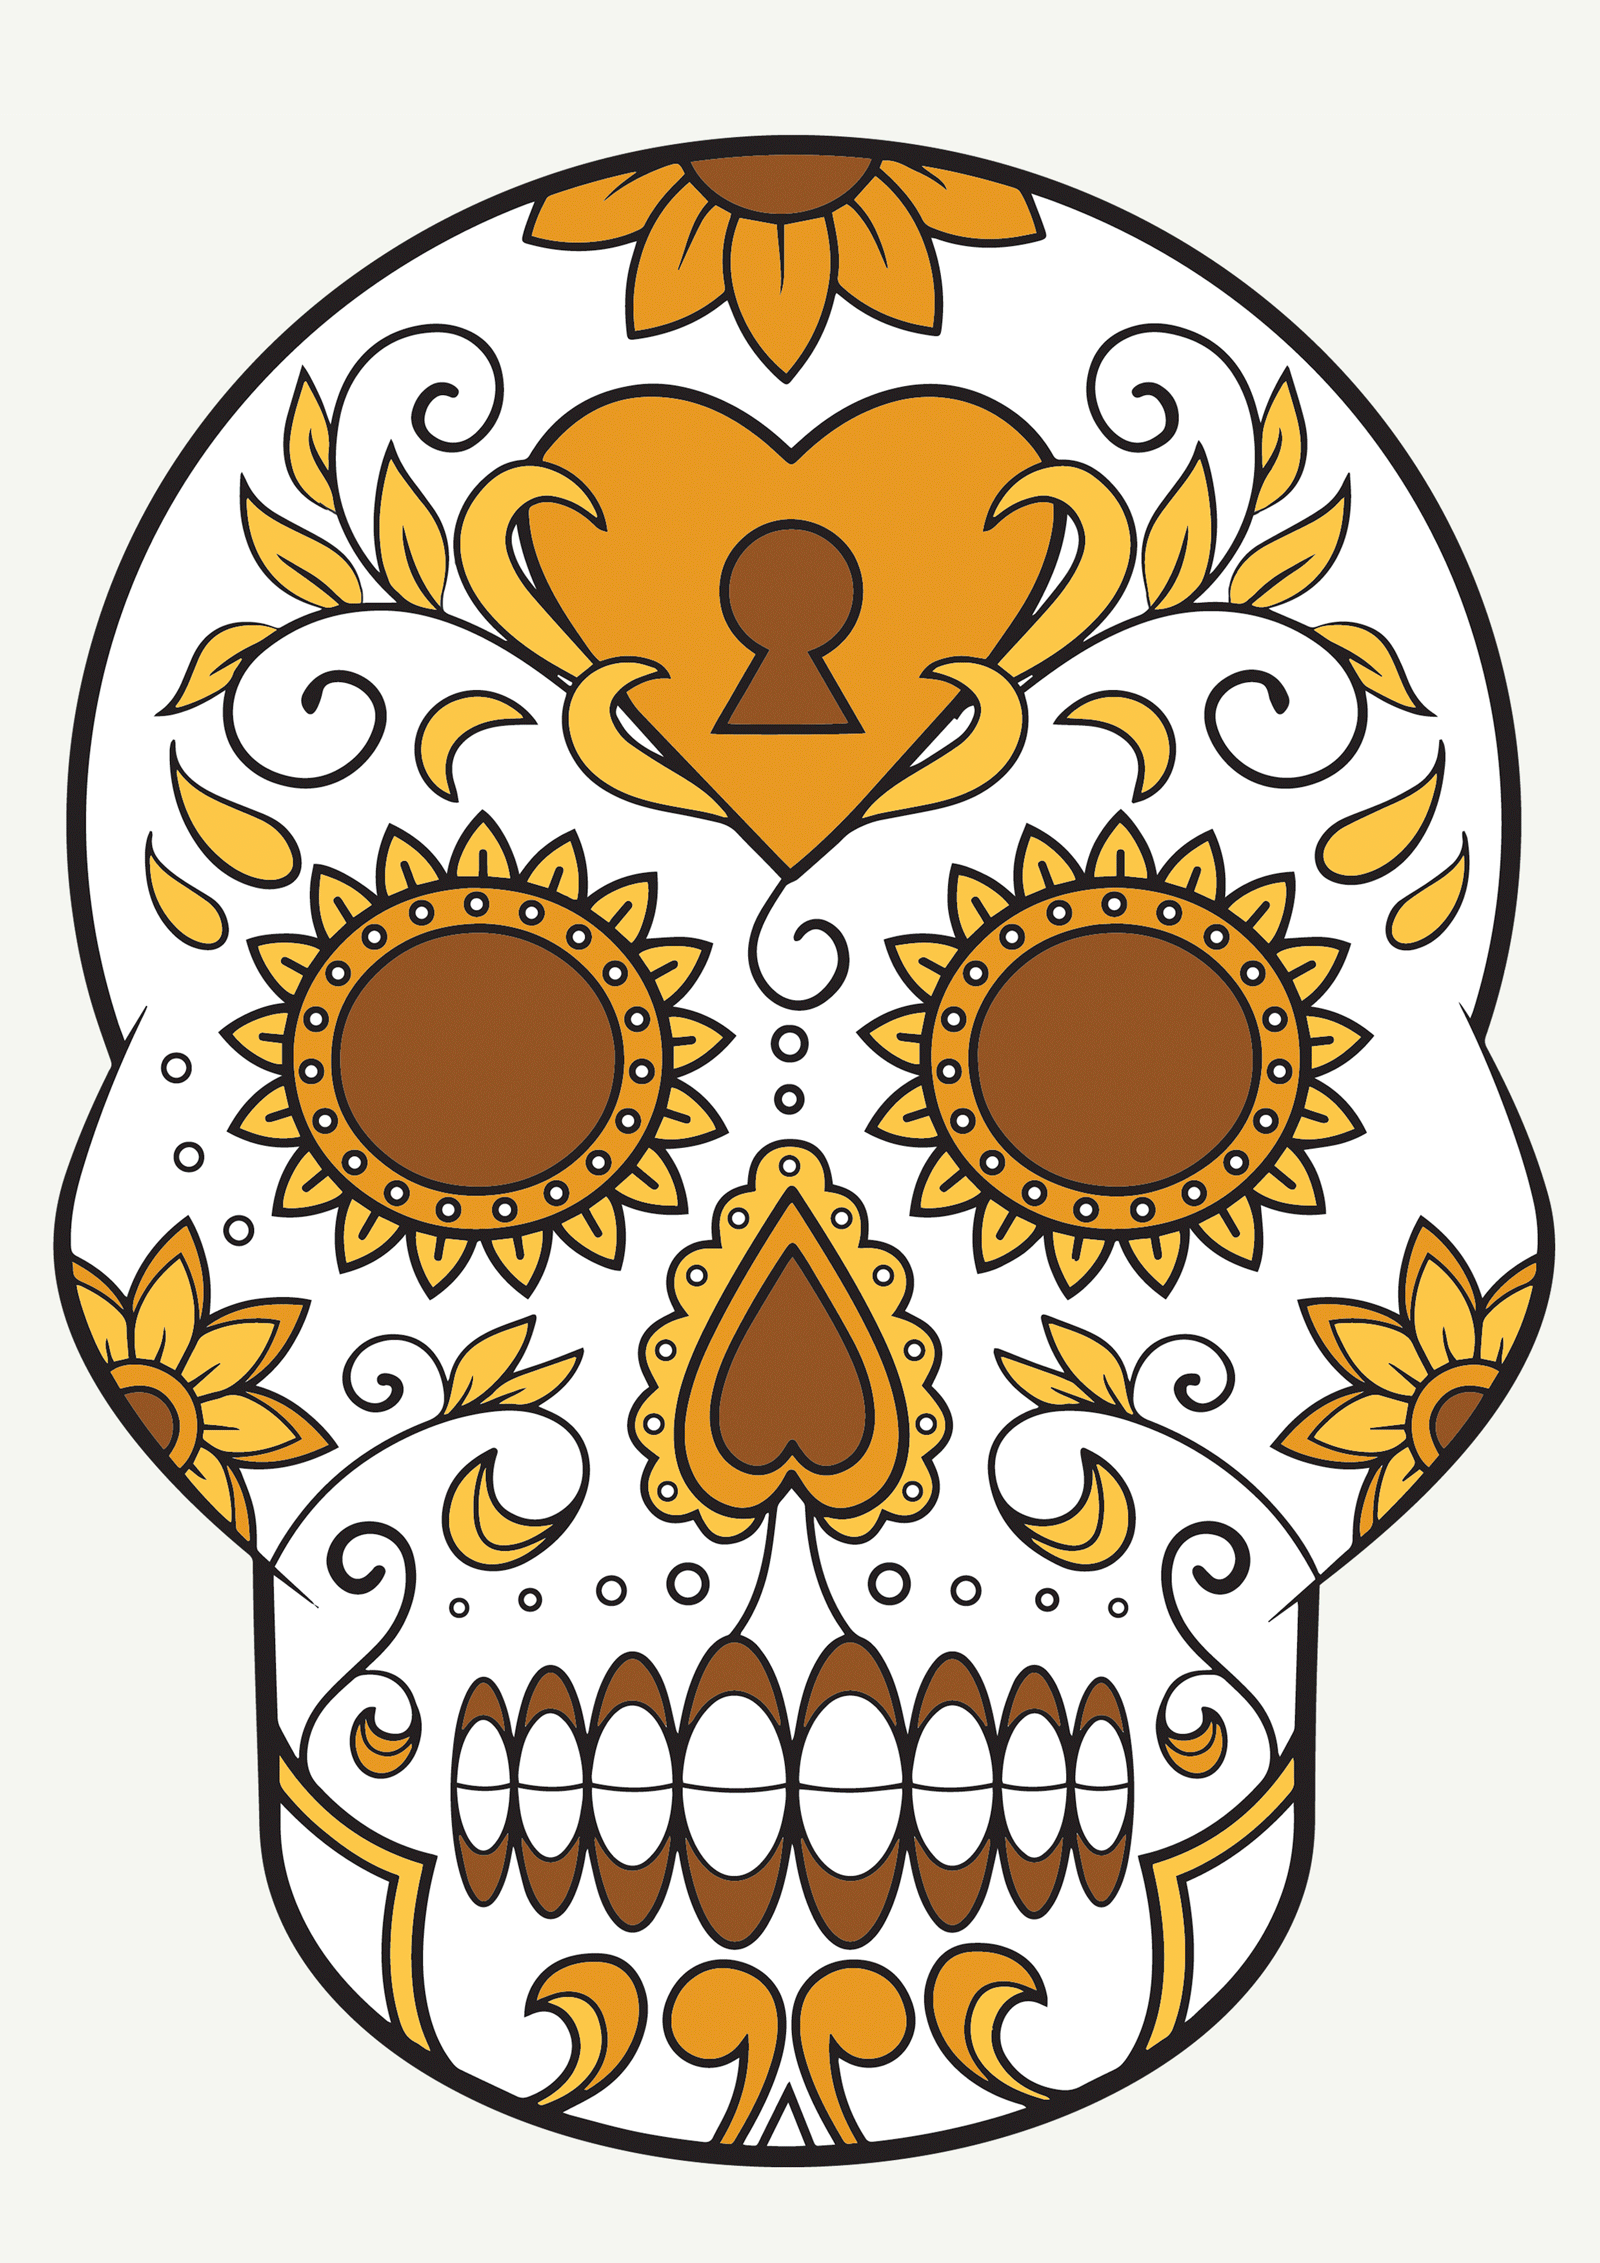 FREE Halloween Colouring In: Day Of The Dead Sugar Skulls